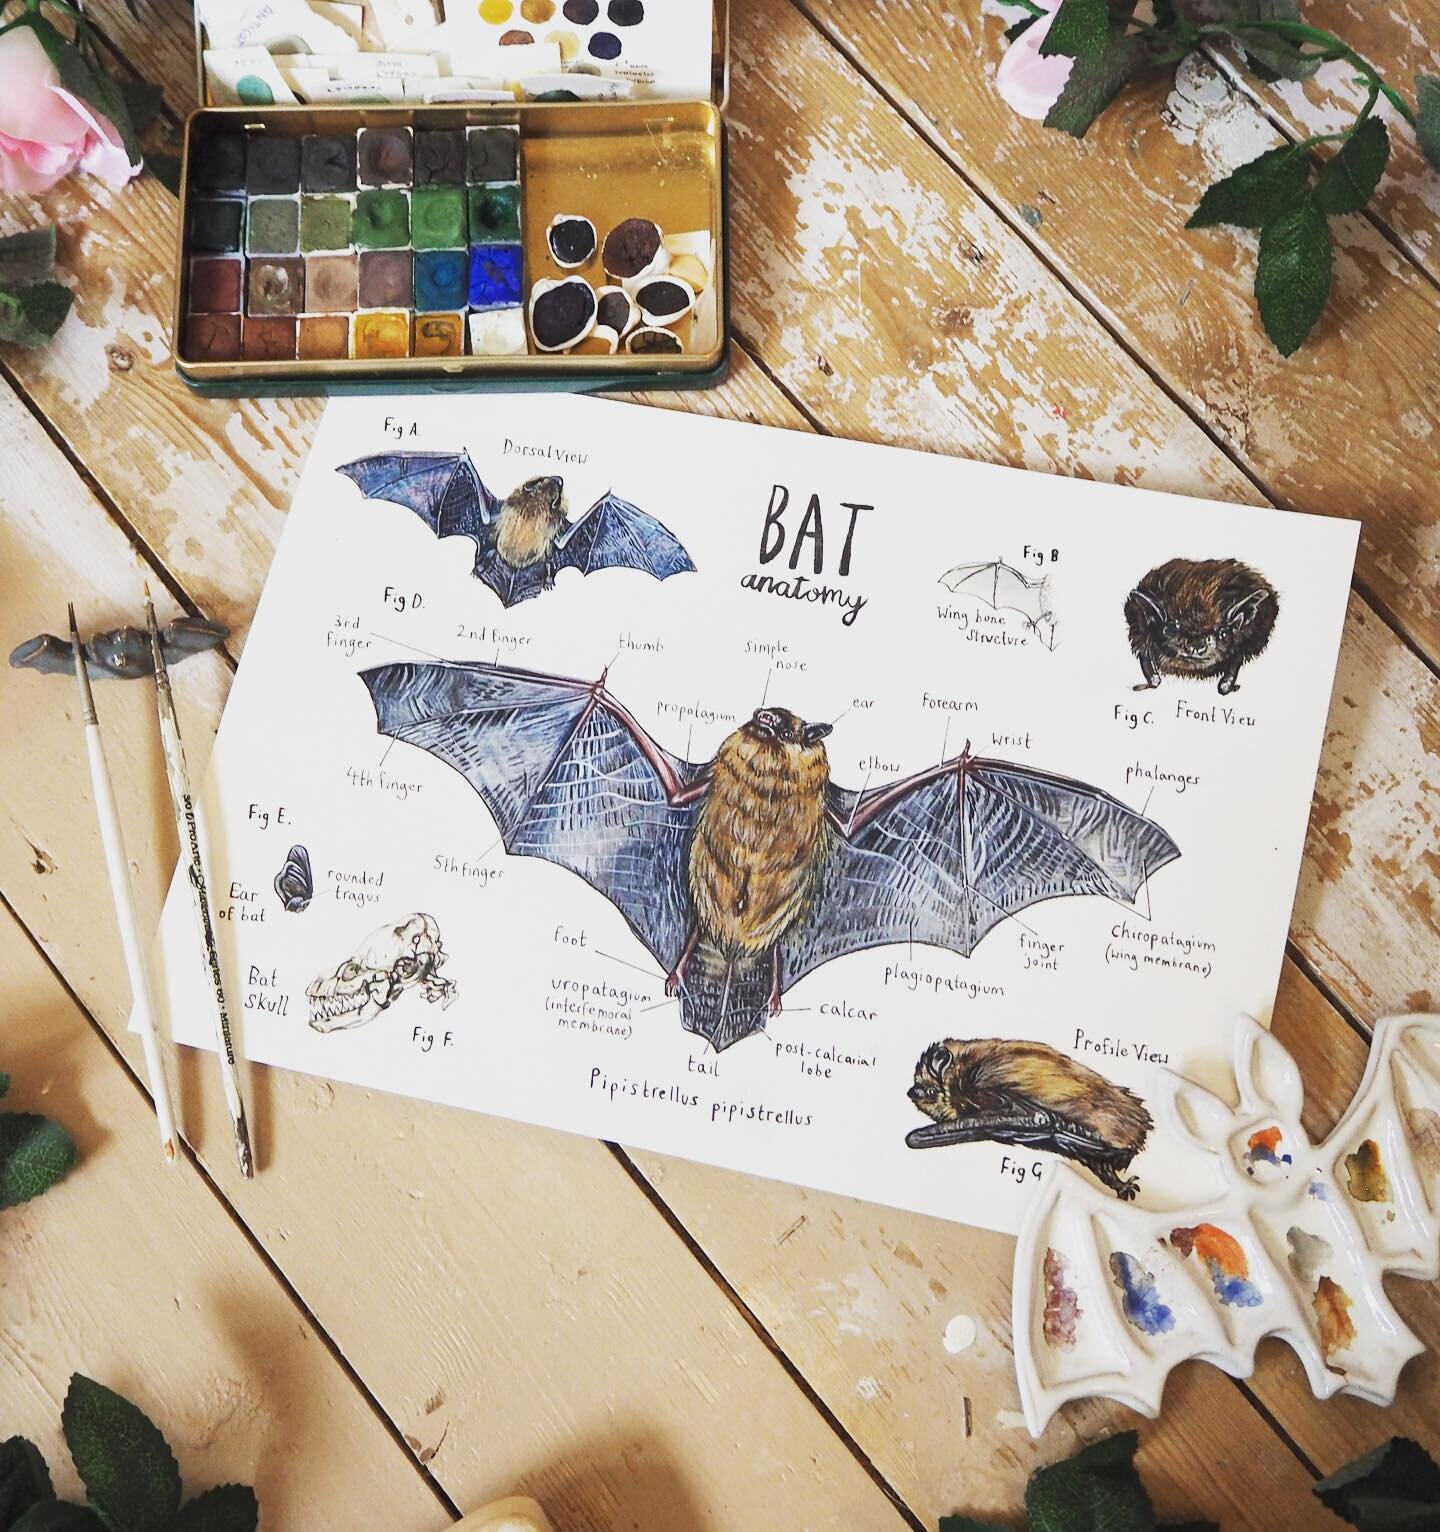 Happy Spooky Day!
🔻
@naomi.joy.art creates detailed animal paintings focussing on British wildlife, conservation and animal rights including this lovely bat anatomy illustration.&nbsp;
🔸
Naomi creates paintings at home in her cosy studio that is al